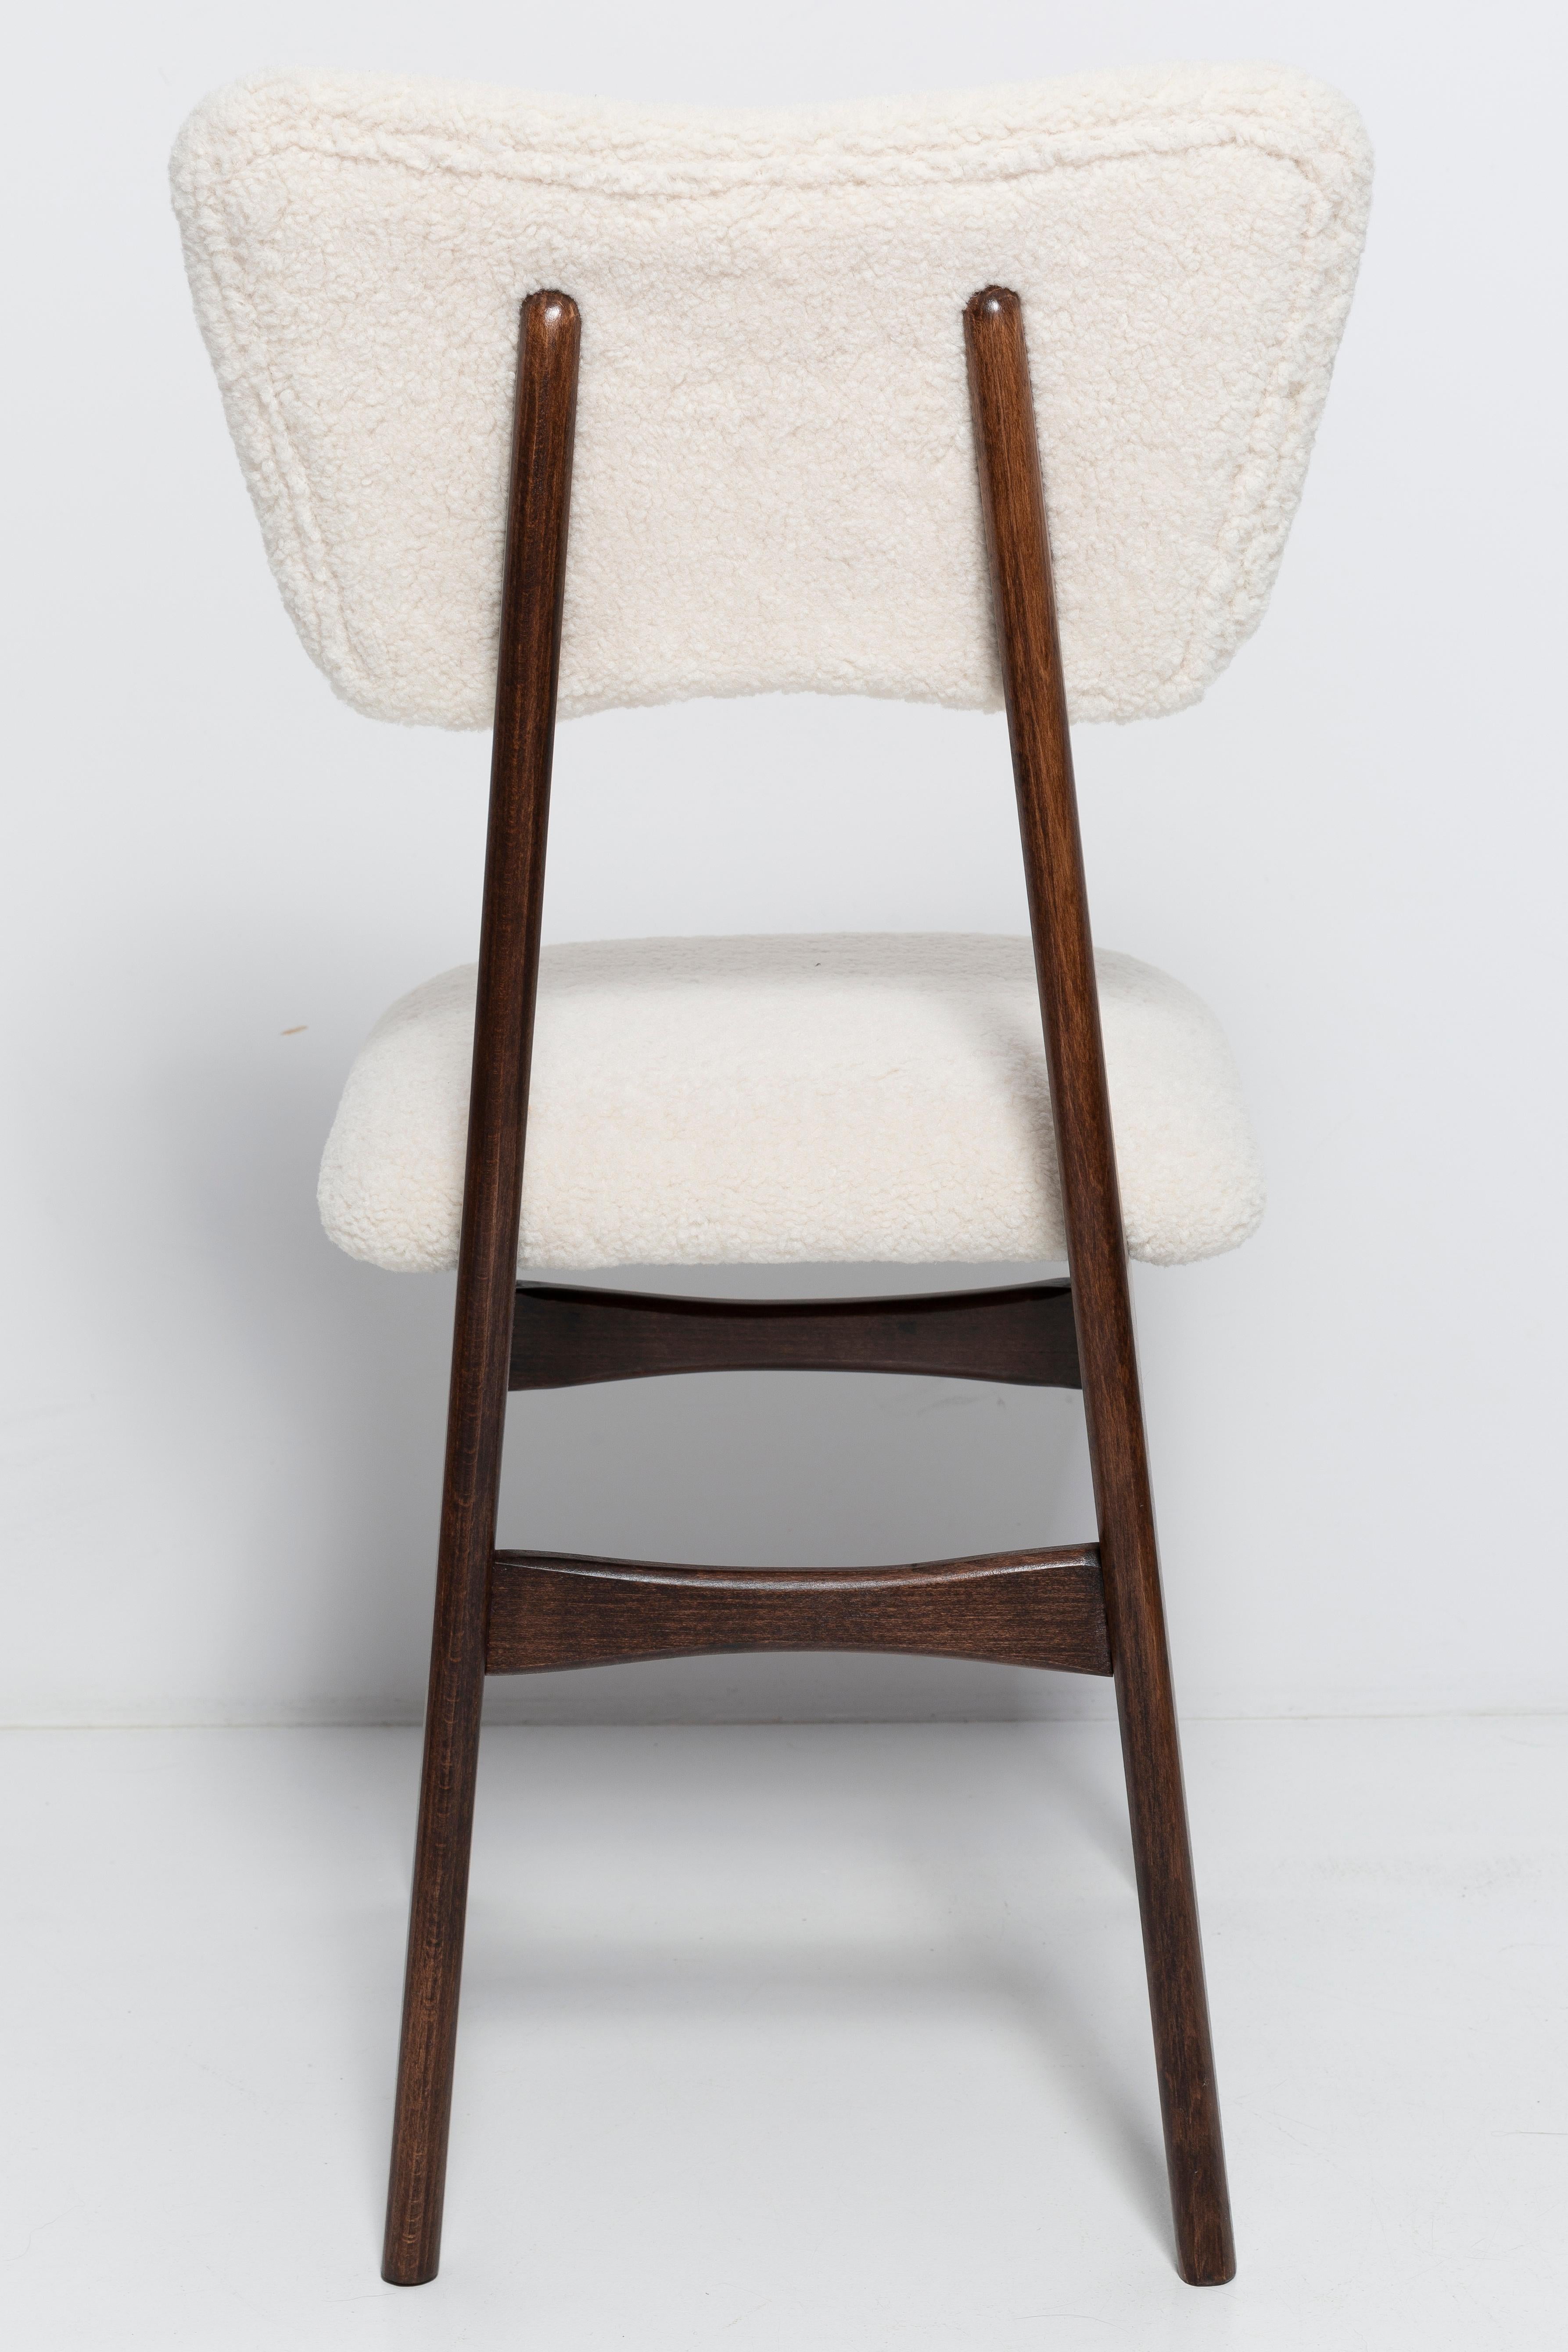 20th Century Light Crème Boucle Walnut Wood Butterfly Chair, Europe, 1960. For Sale 2